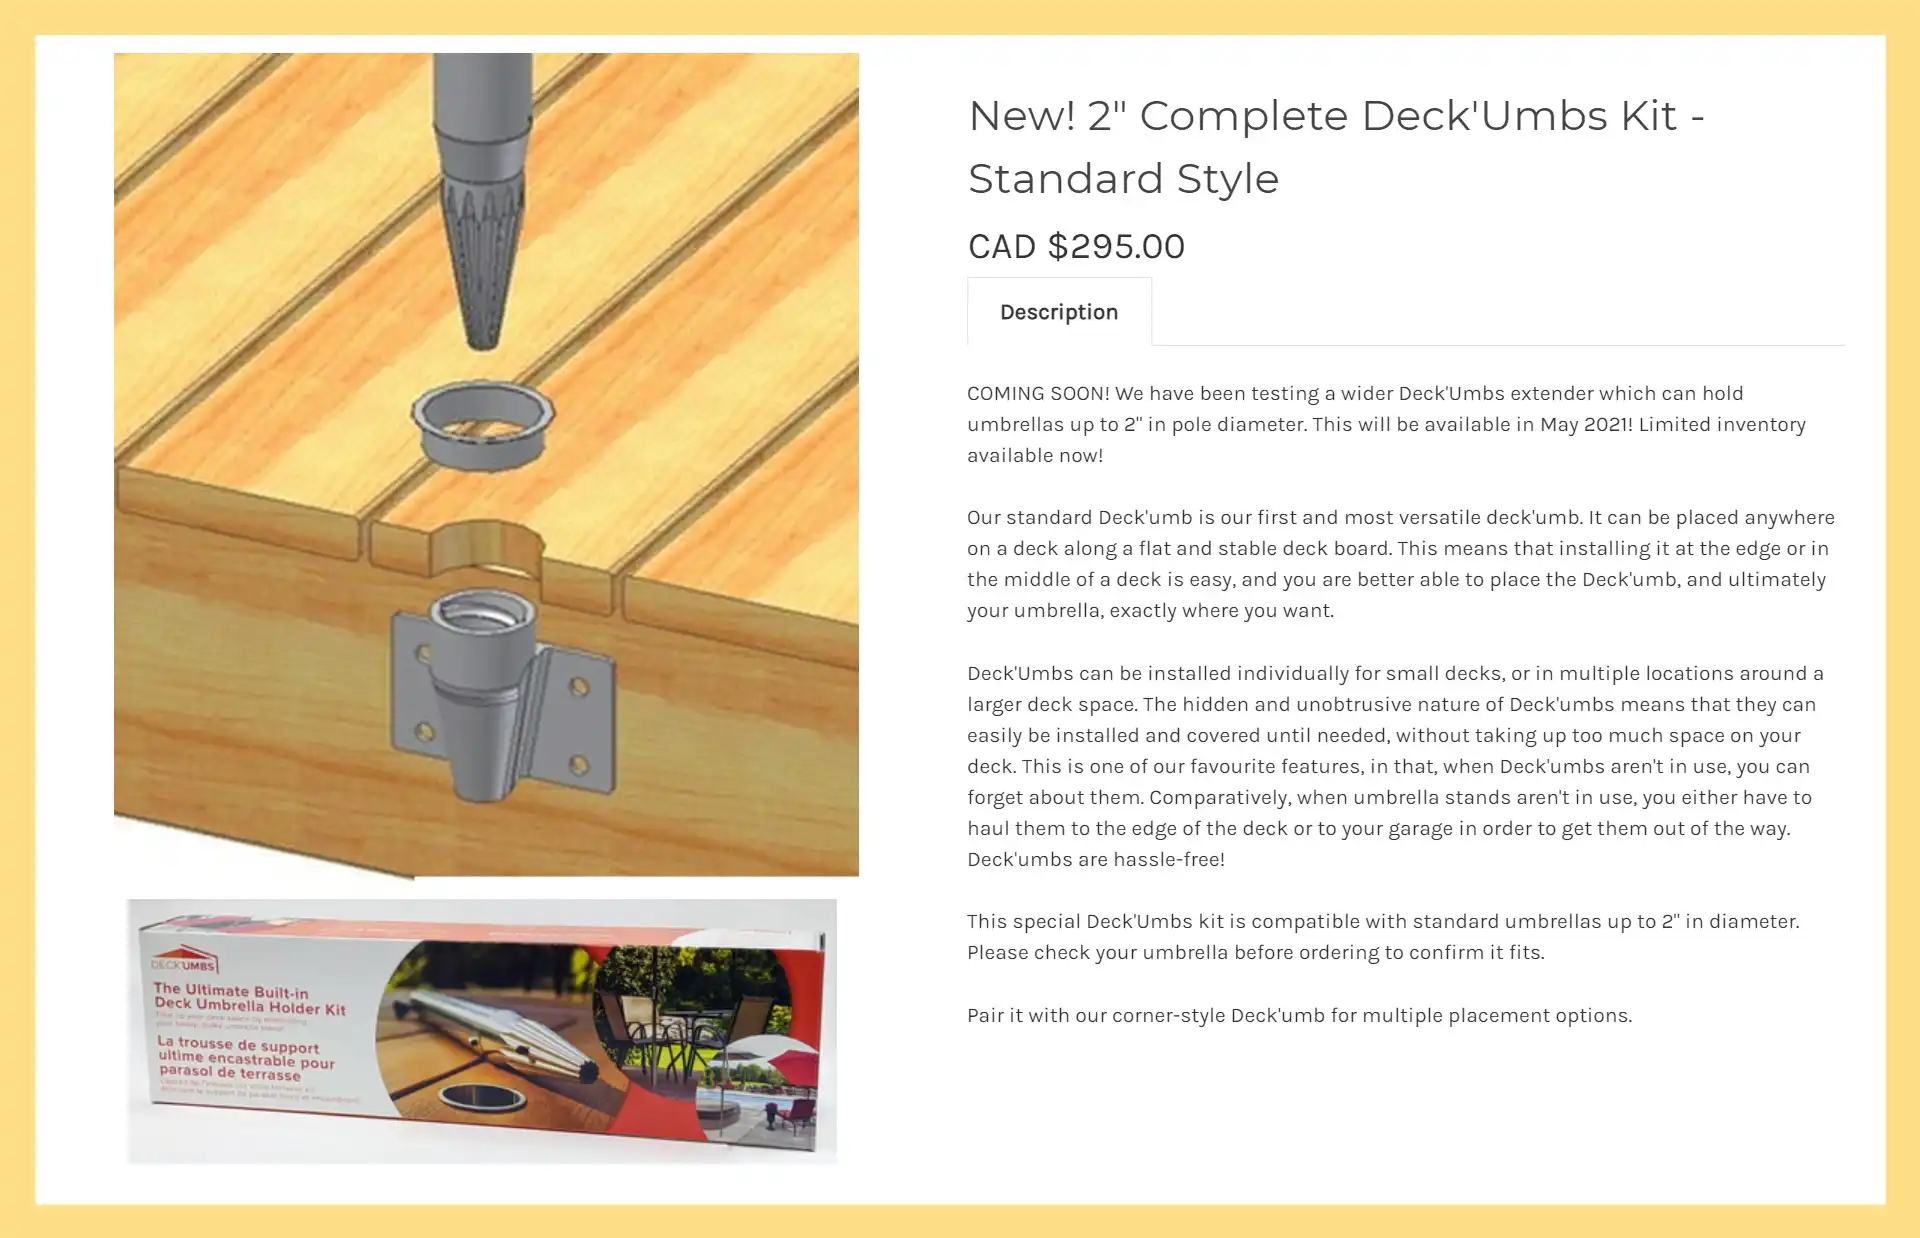 DECK'UMBS 2.0 inch Complete STANDARD Style Kit $295